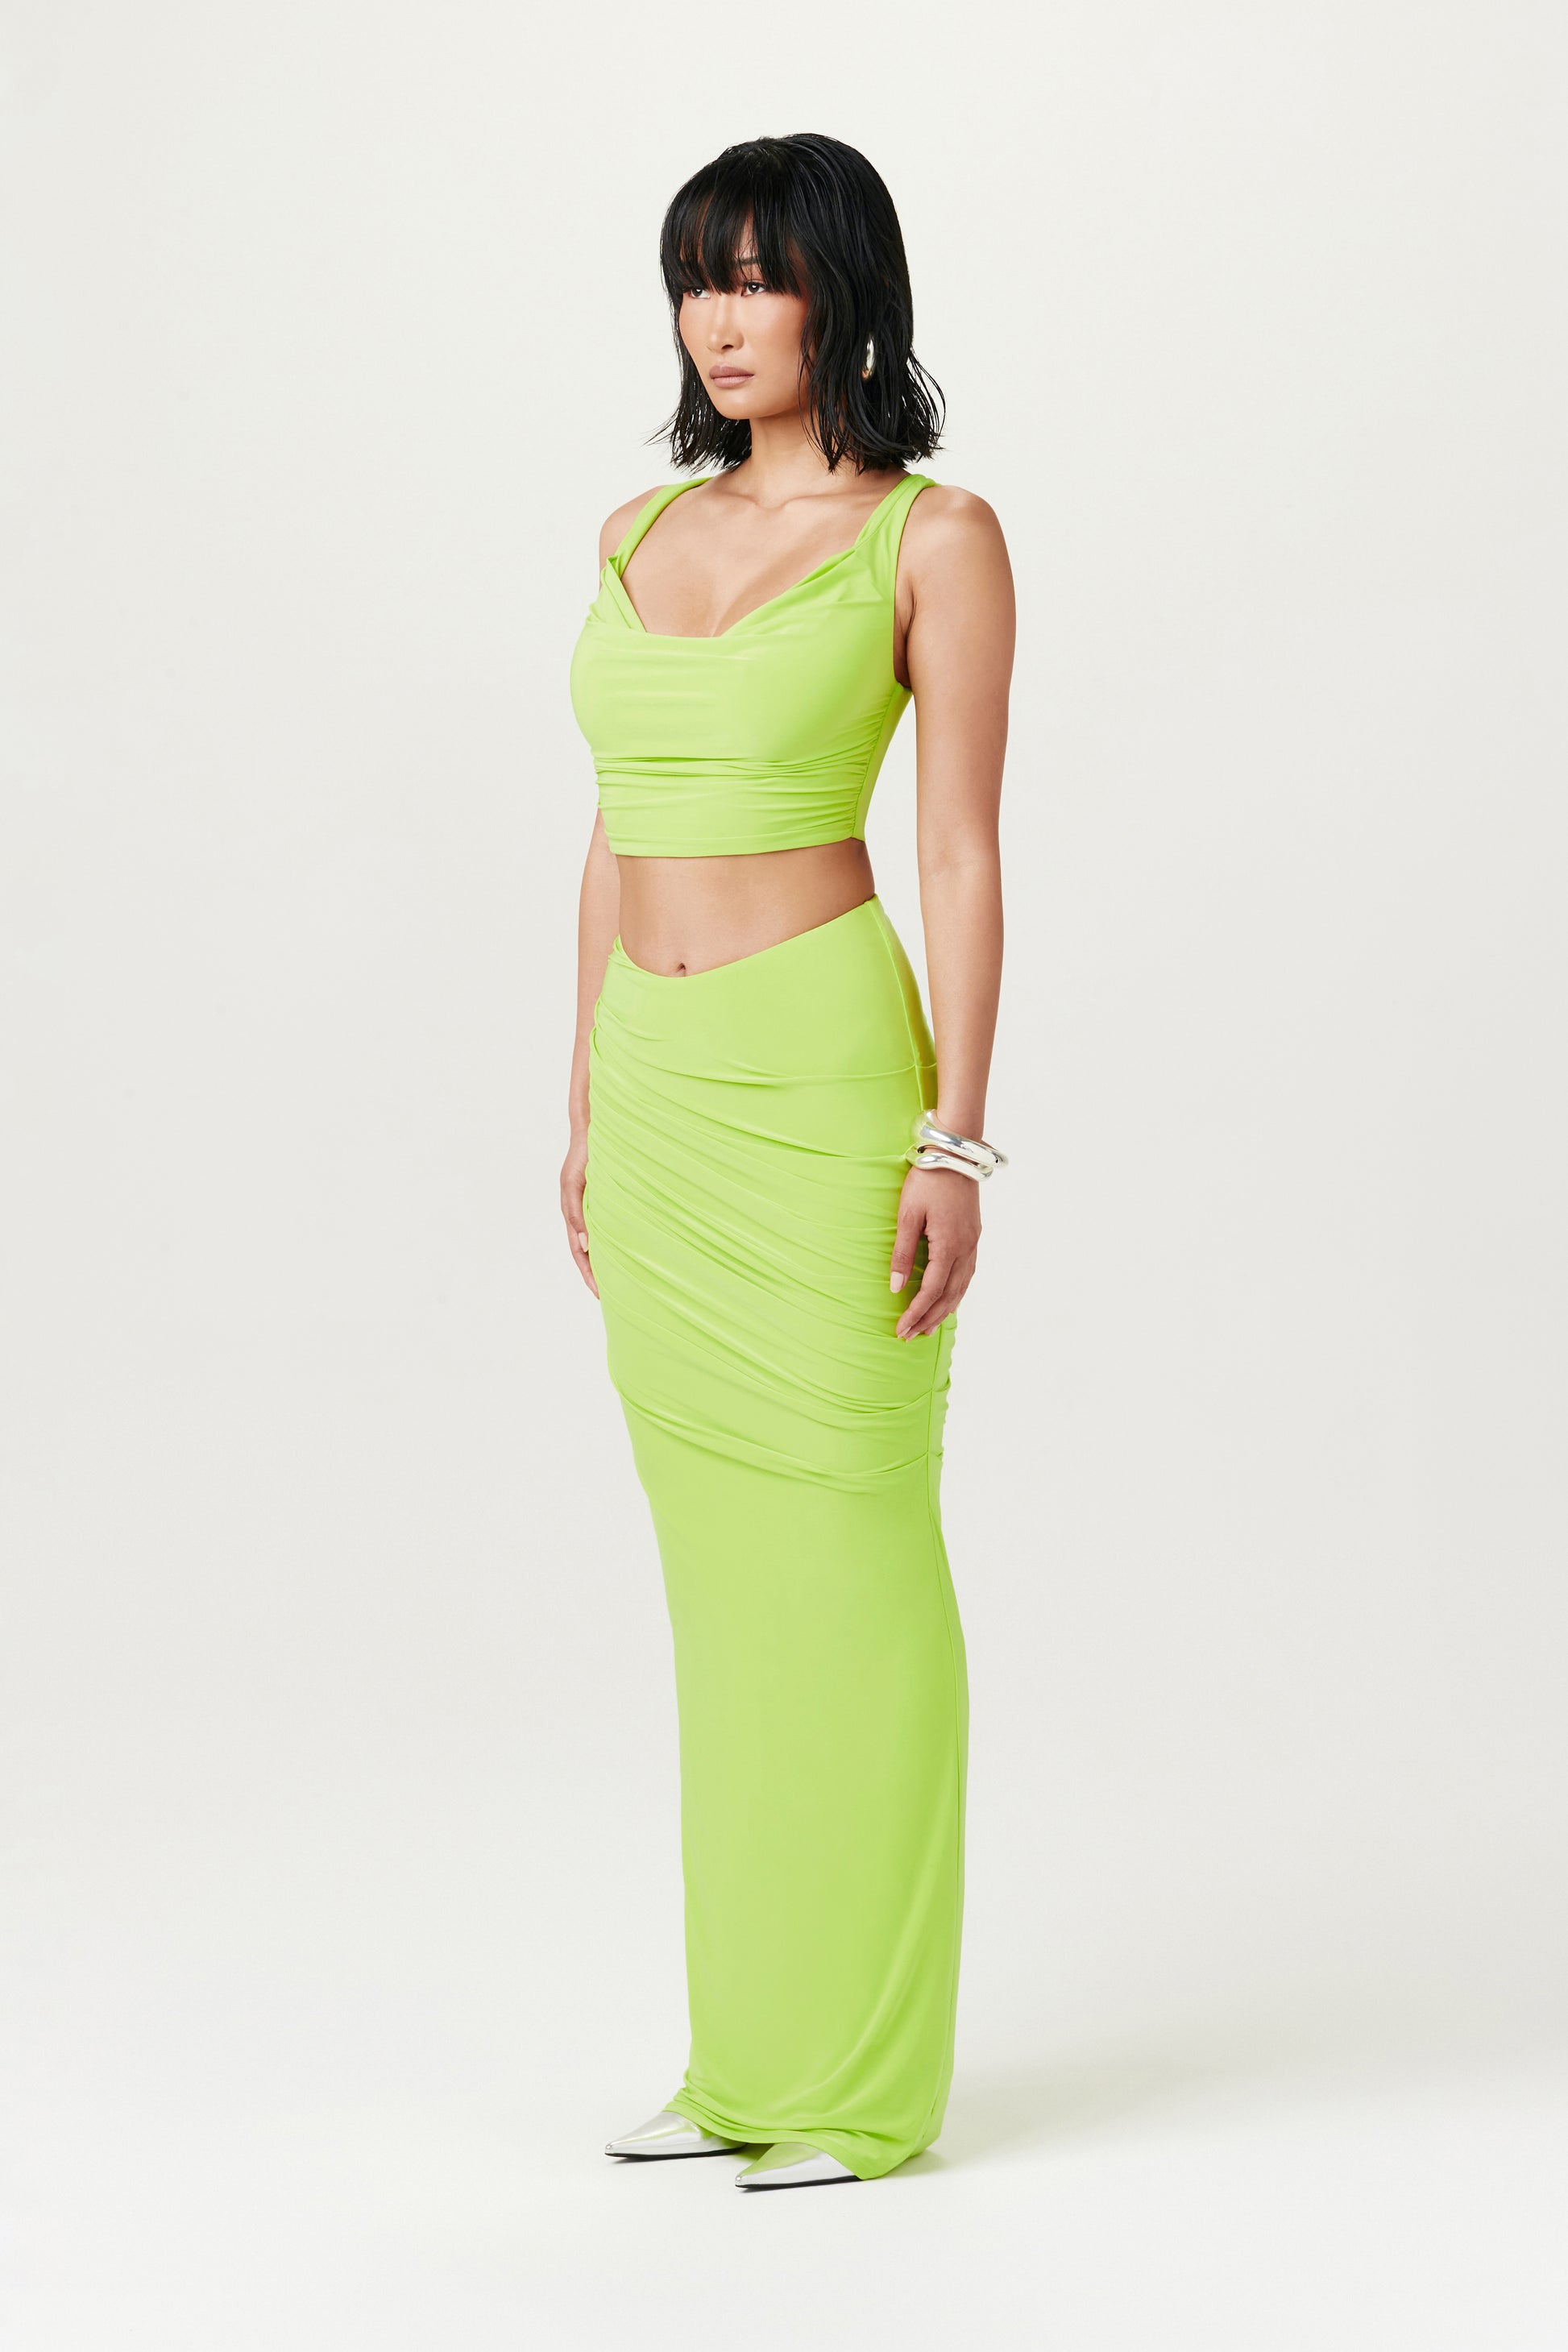 lime green crop cowl top and maxi skirt on woman standing upright